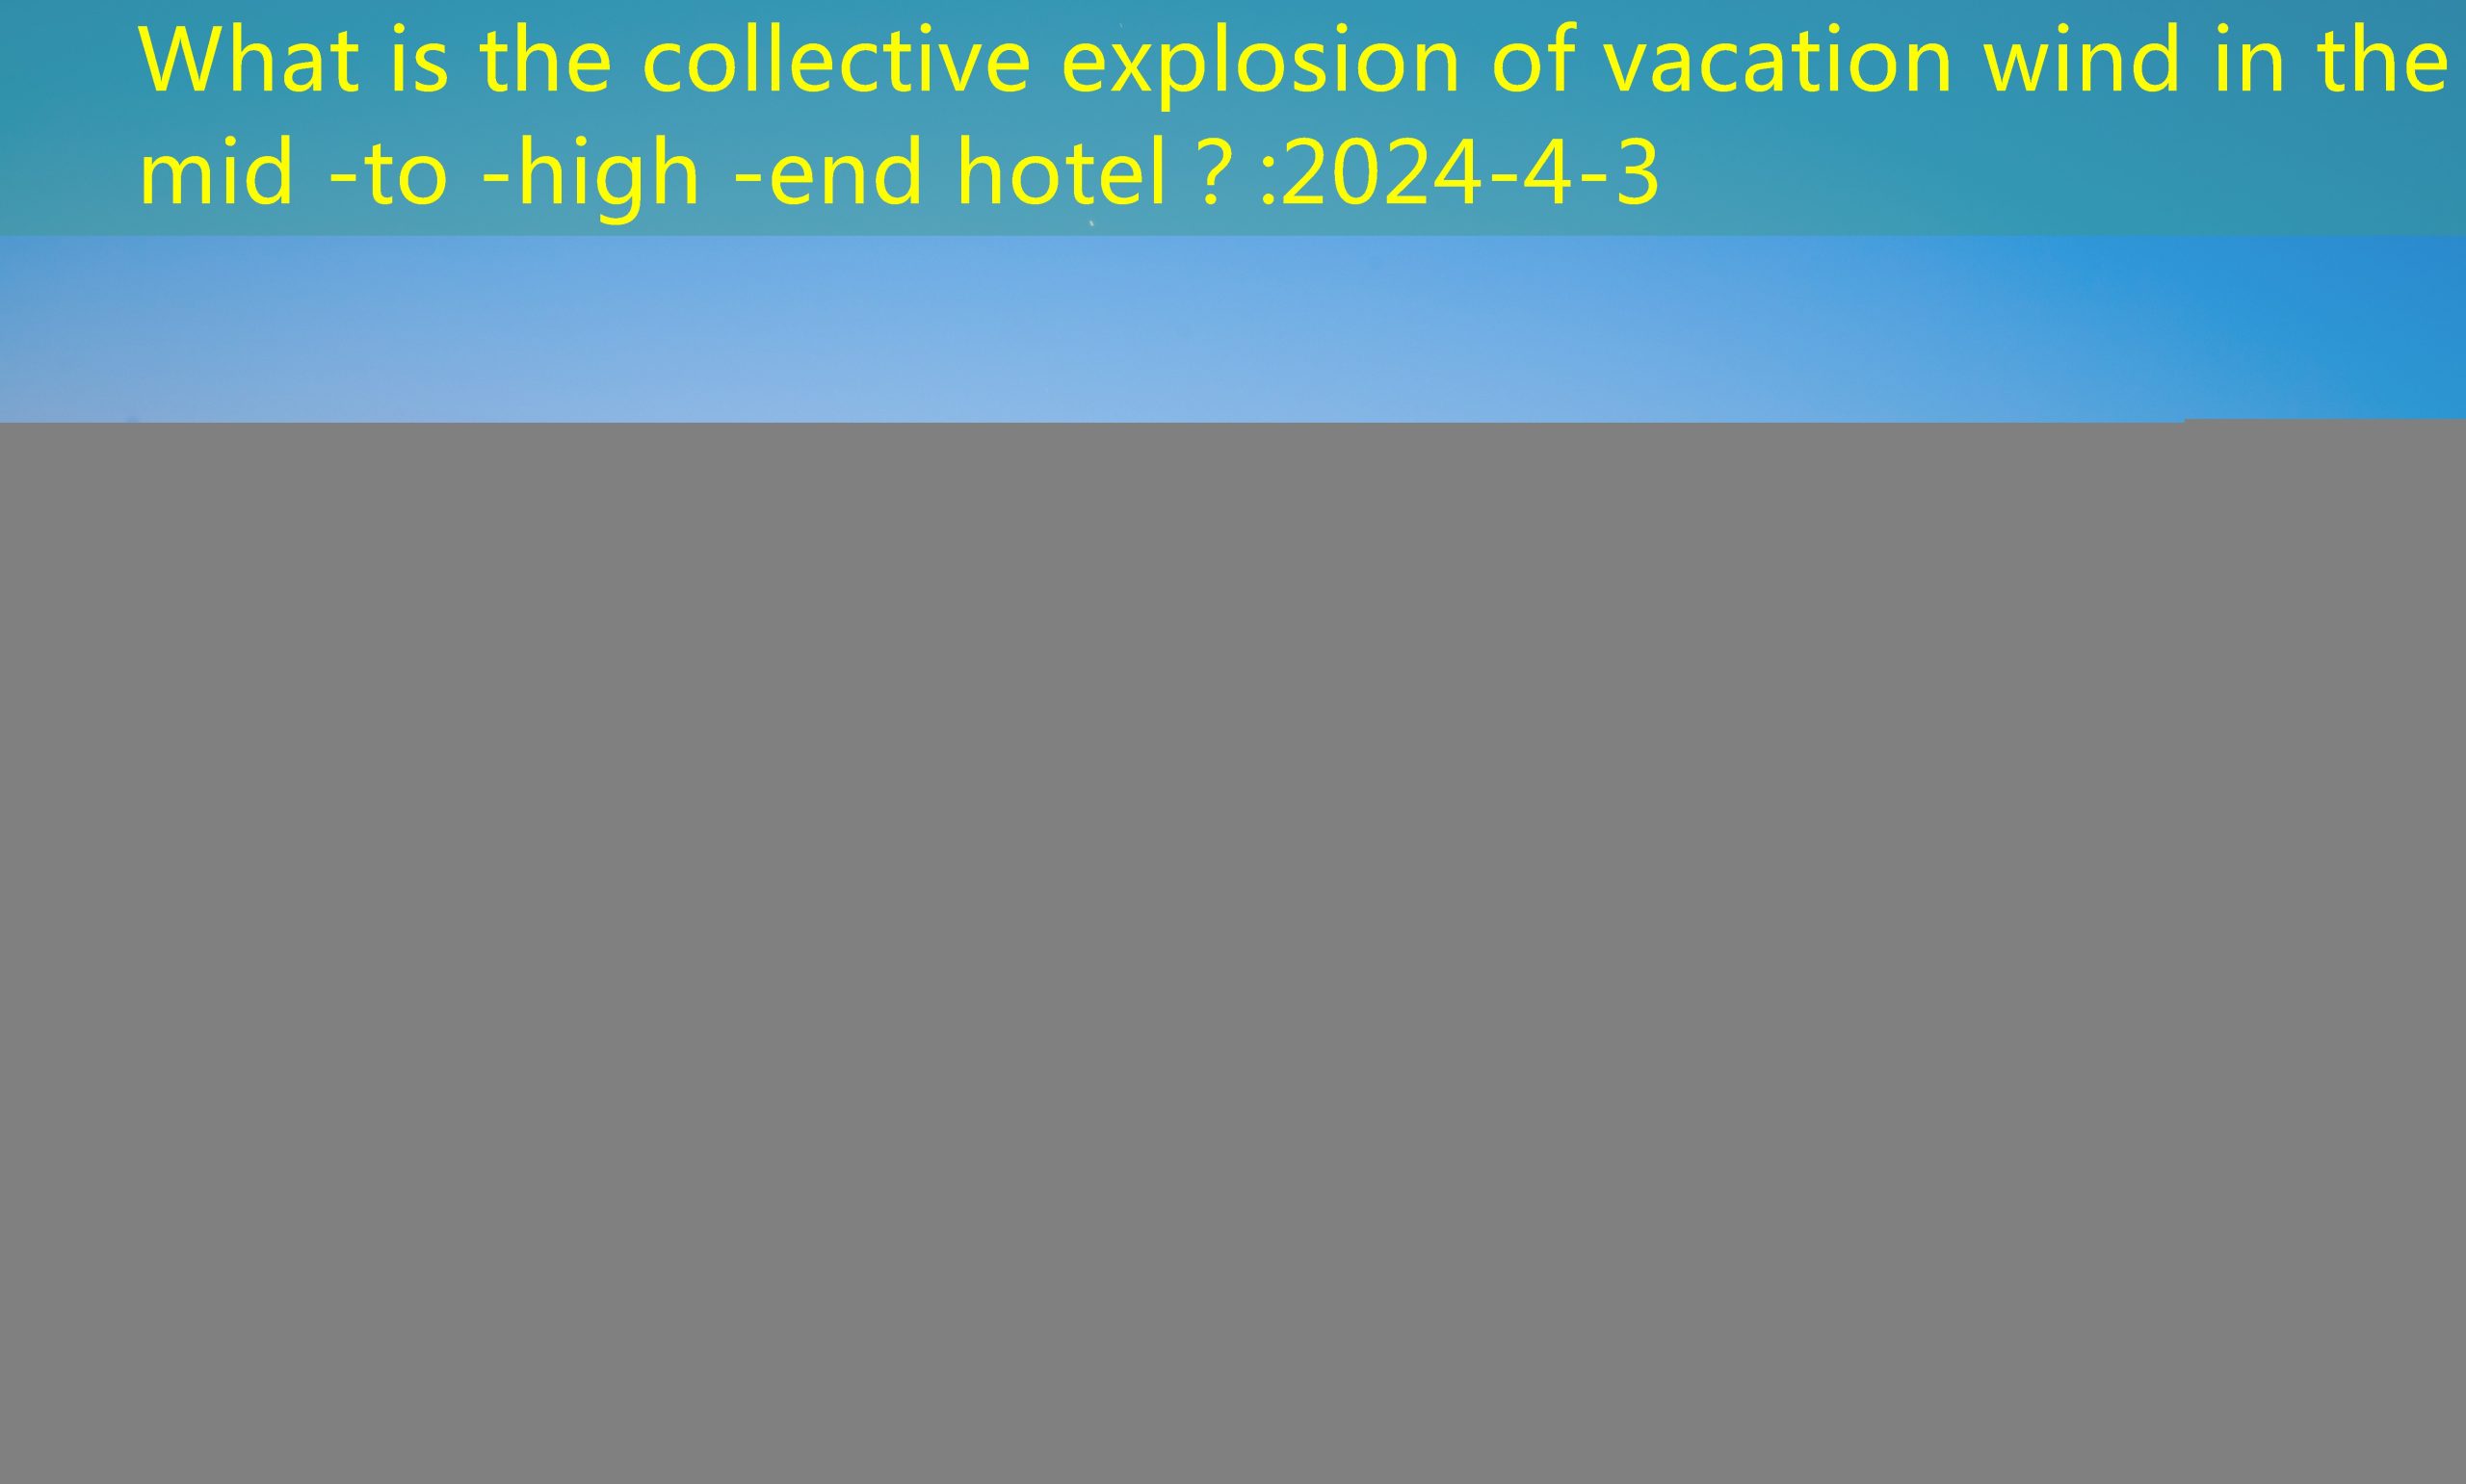 What is the collective explosion of vacation wind in the mid -to -high -end hotel？